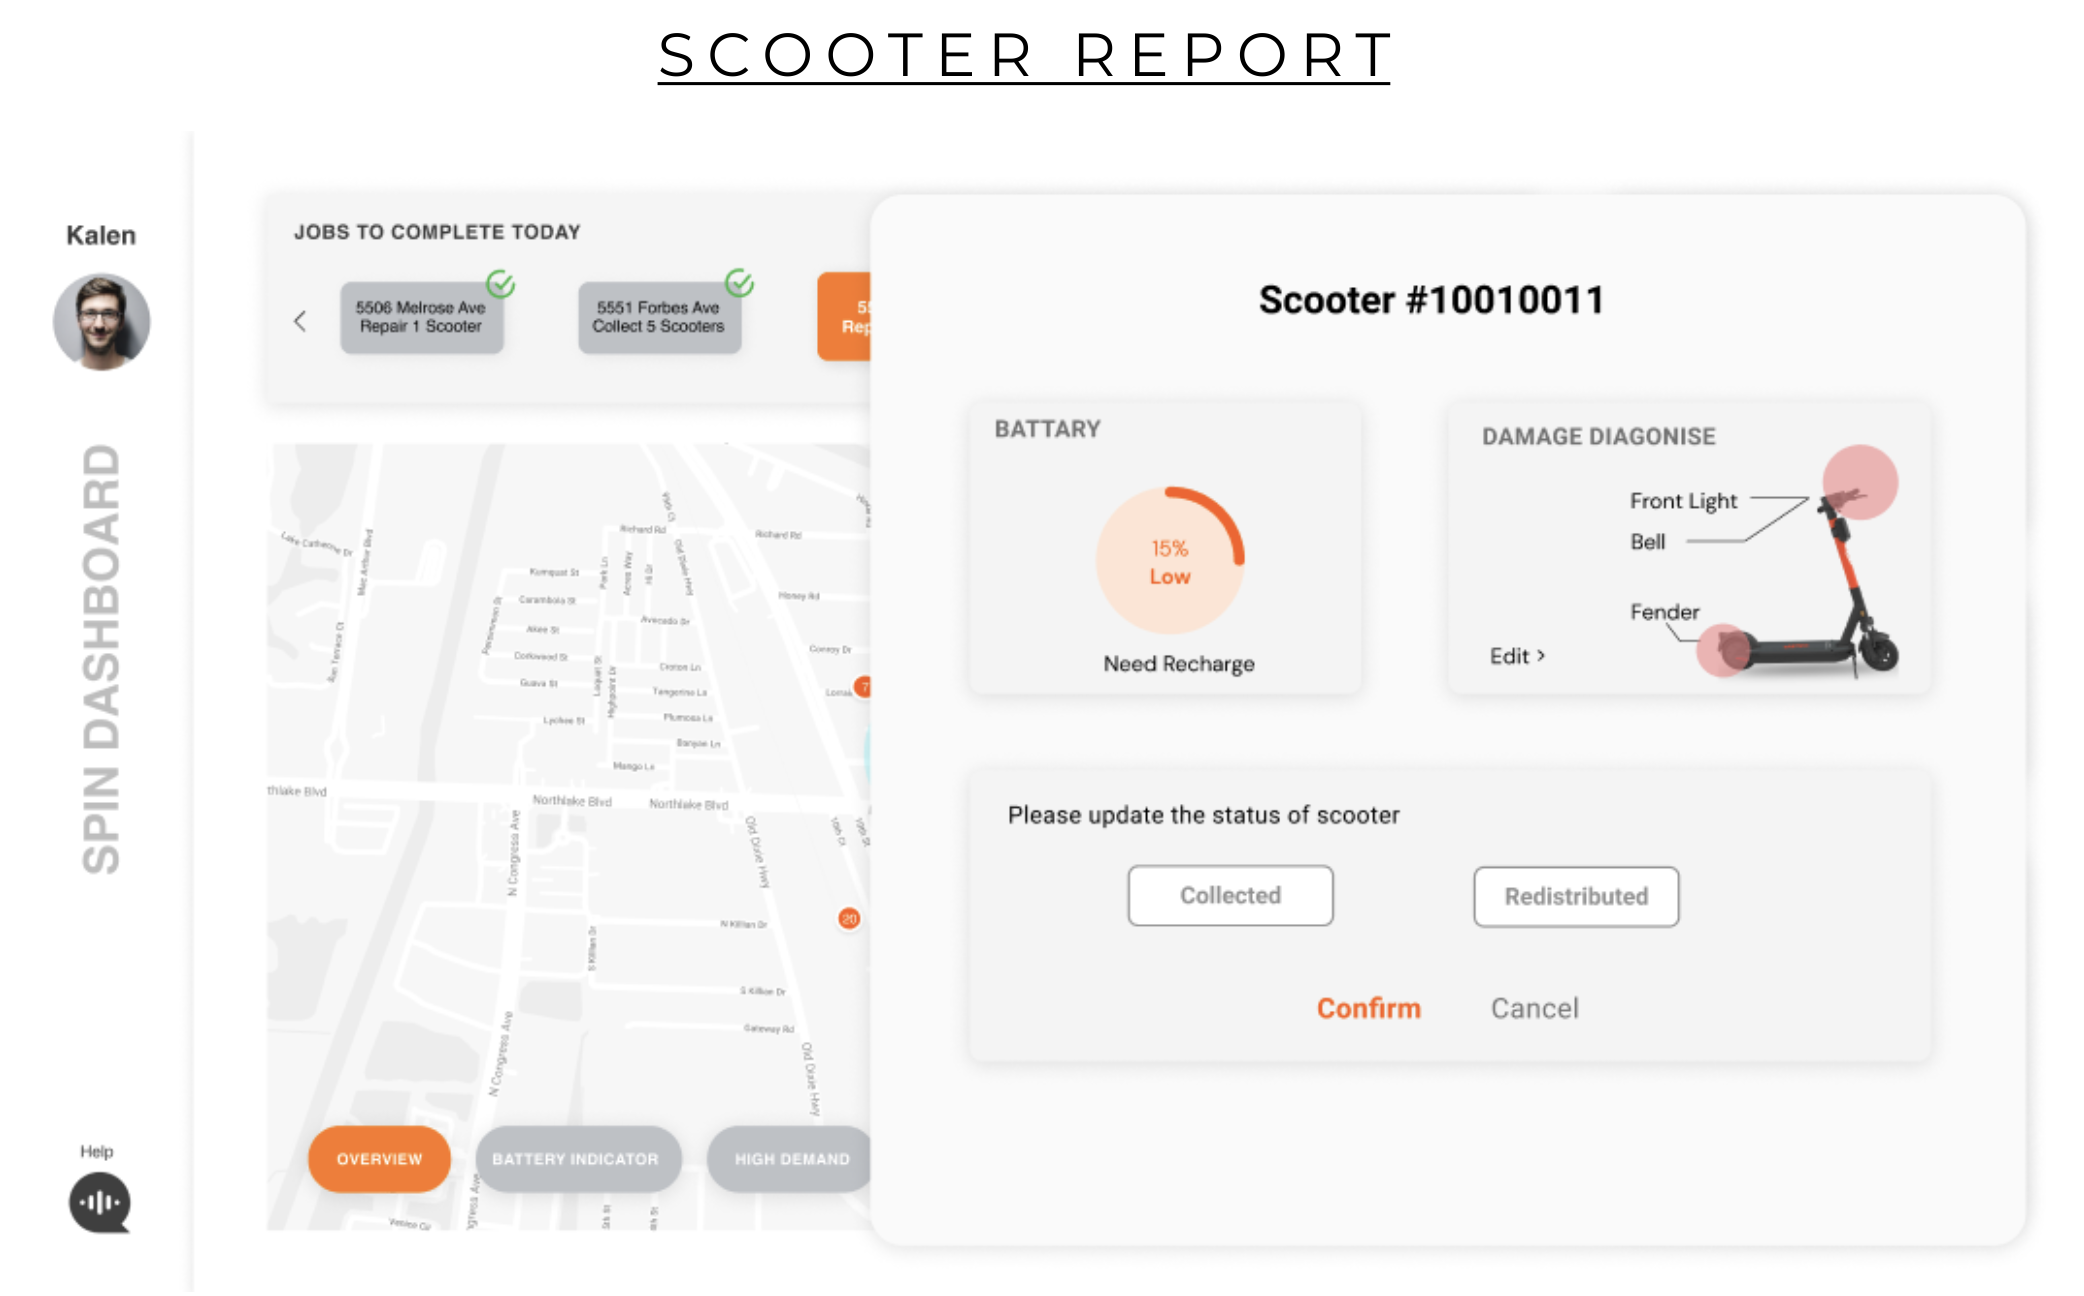 Quick spin scooter analysis view for Kalen the Gig Worker